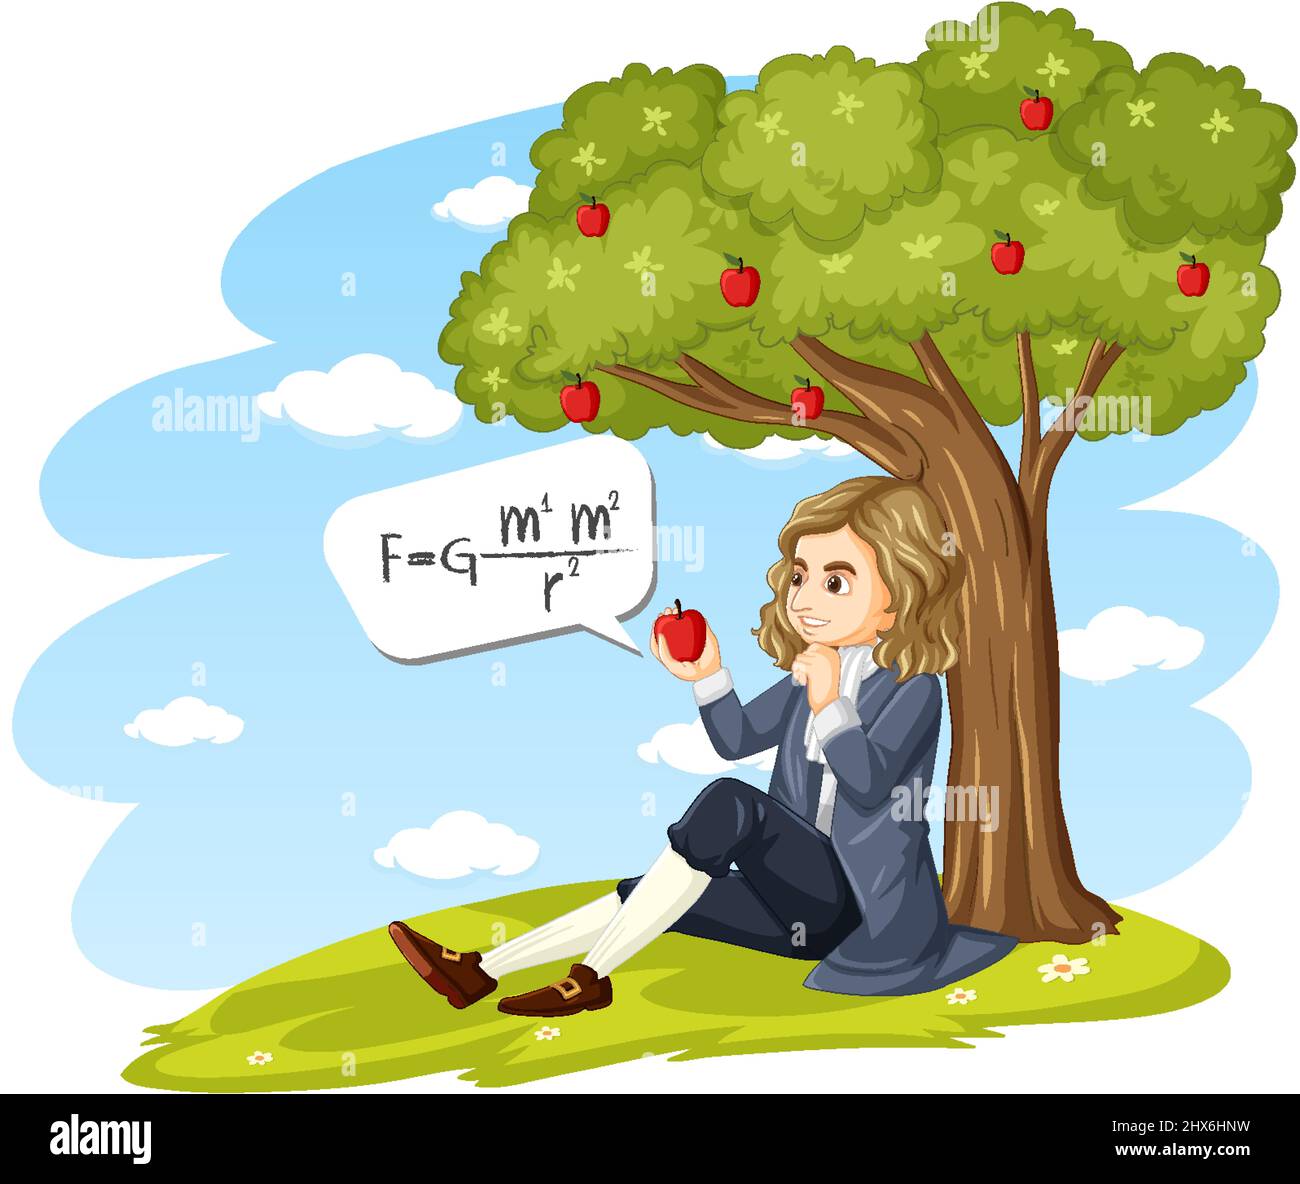 Isaac newton apple Cut Out Stock Images & Pictures - Alamy